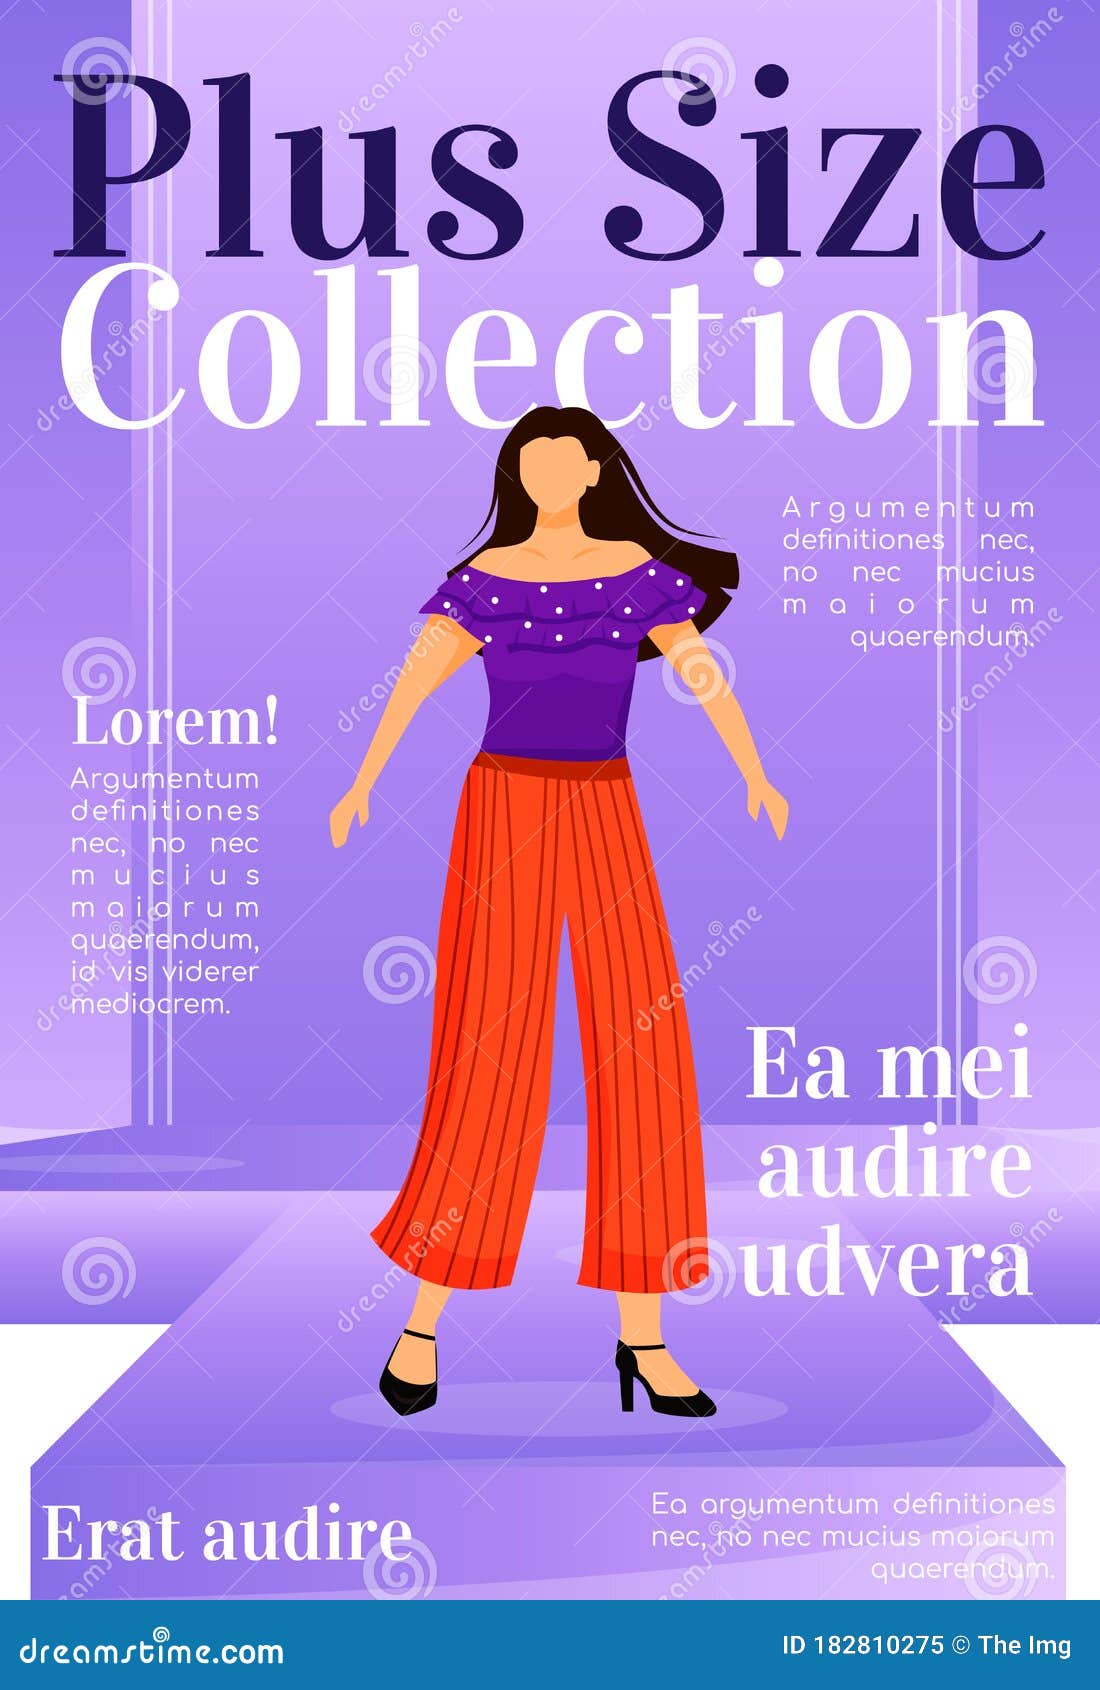 plus-size-collection-magazine-cover-template-stock-vector